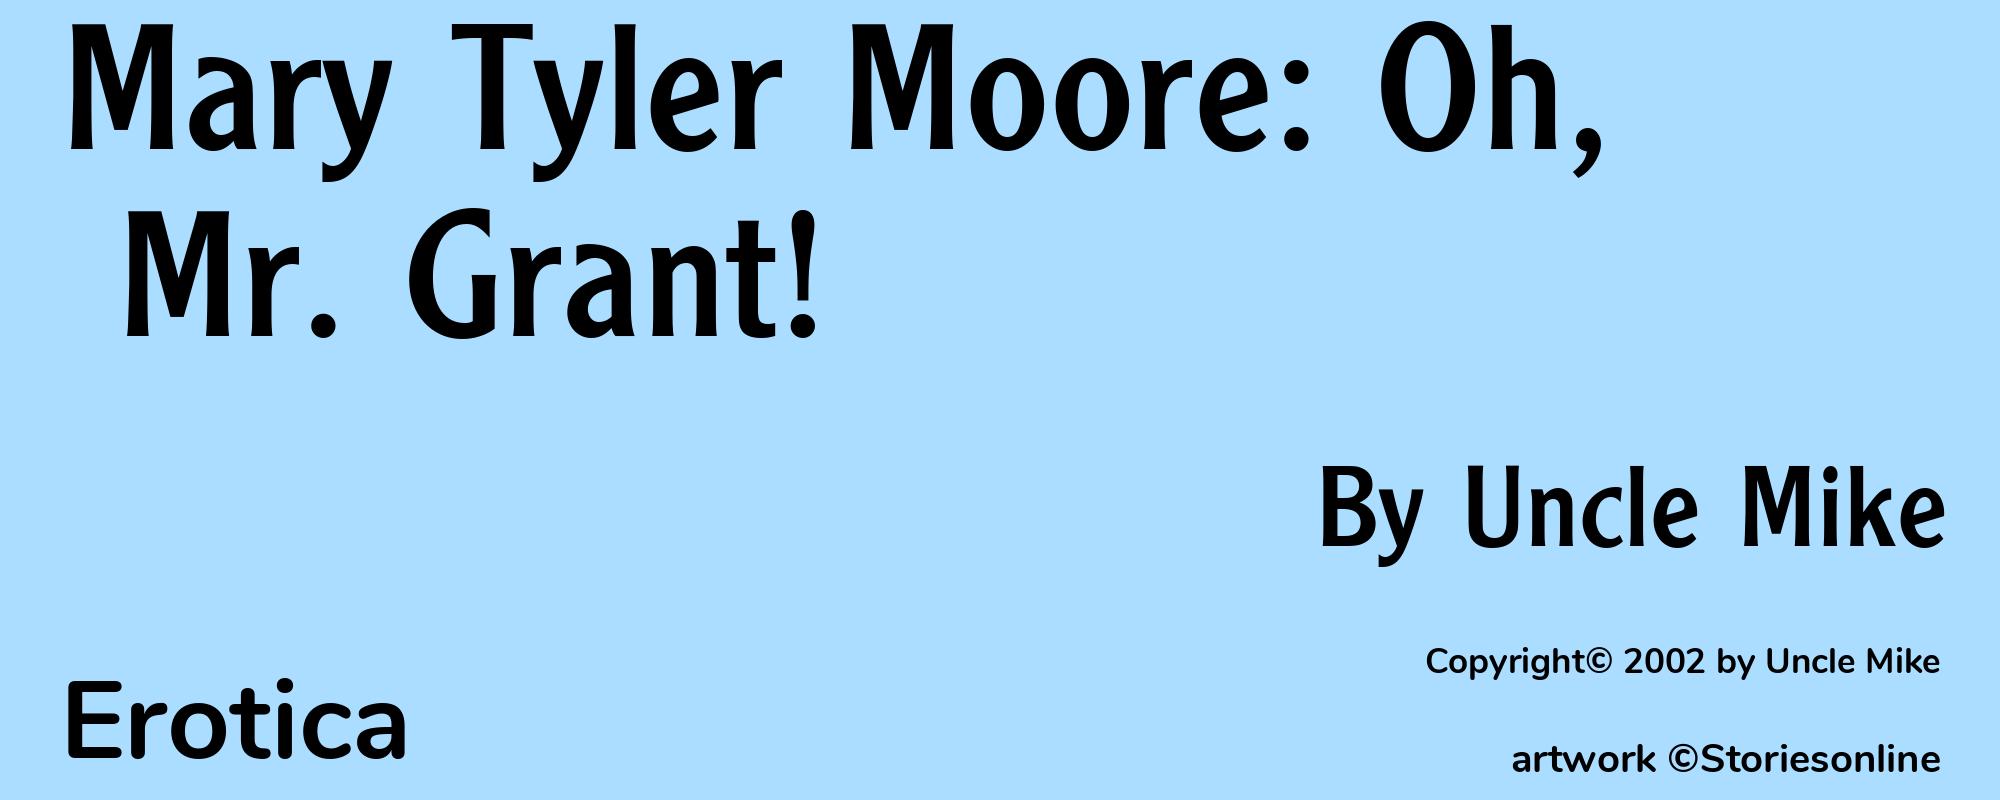 Mary Tyler Moore: Oh, Mr. Grant! - Cover